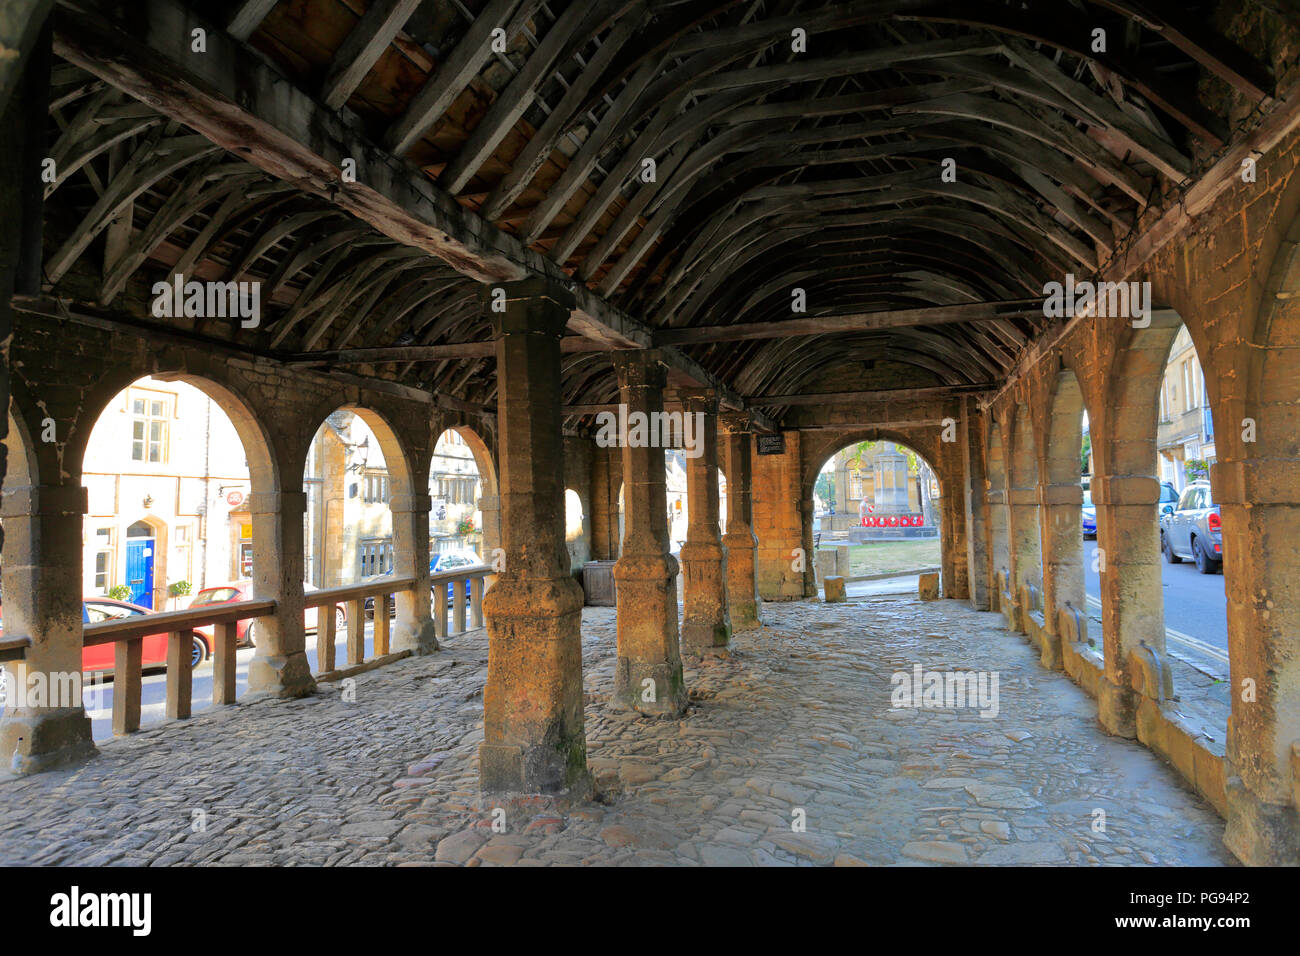 The historic Market Hall, Chipping Campden, Gloucestershire Cotswolds, England, UK Stock Photo